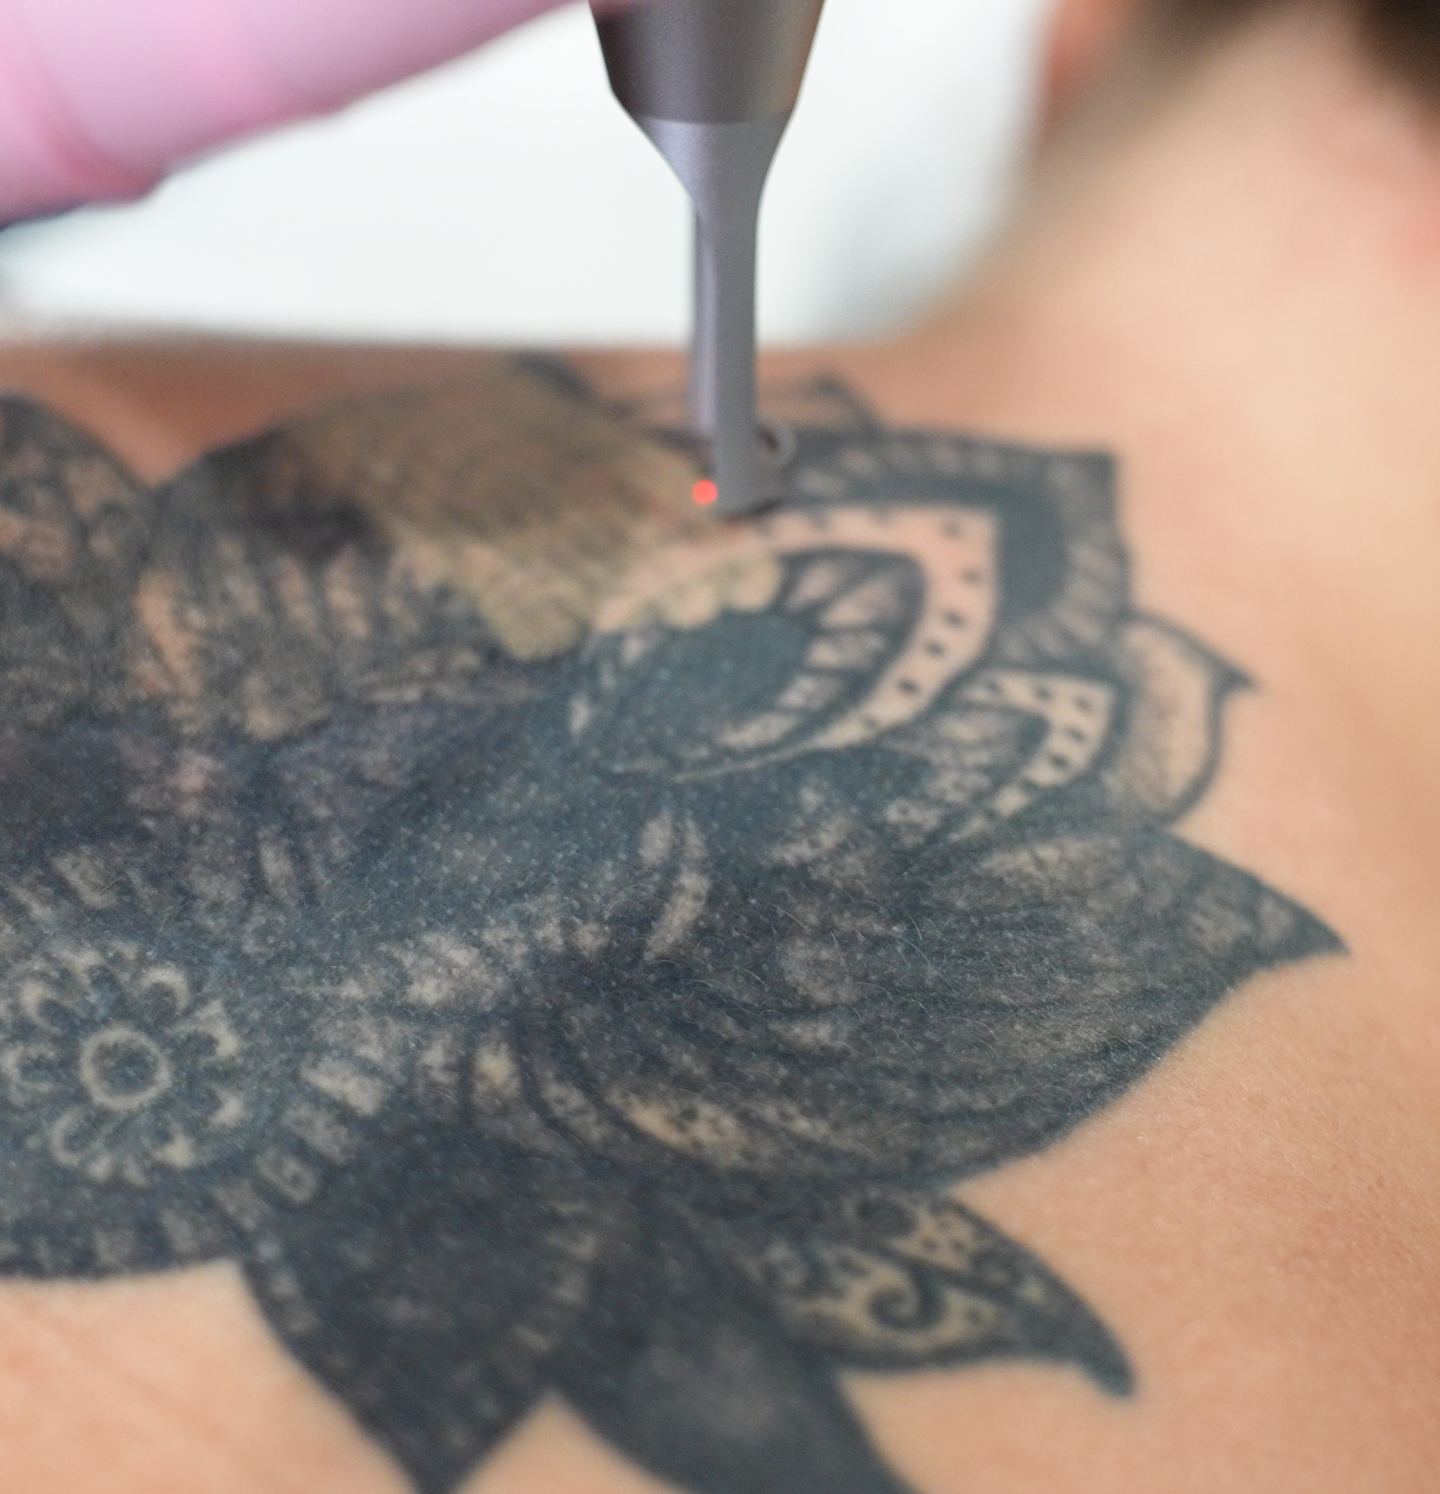 Is Laser Tattoo Removal 100% Safe?